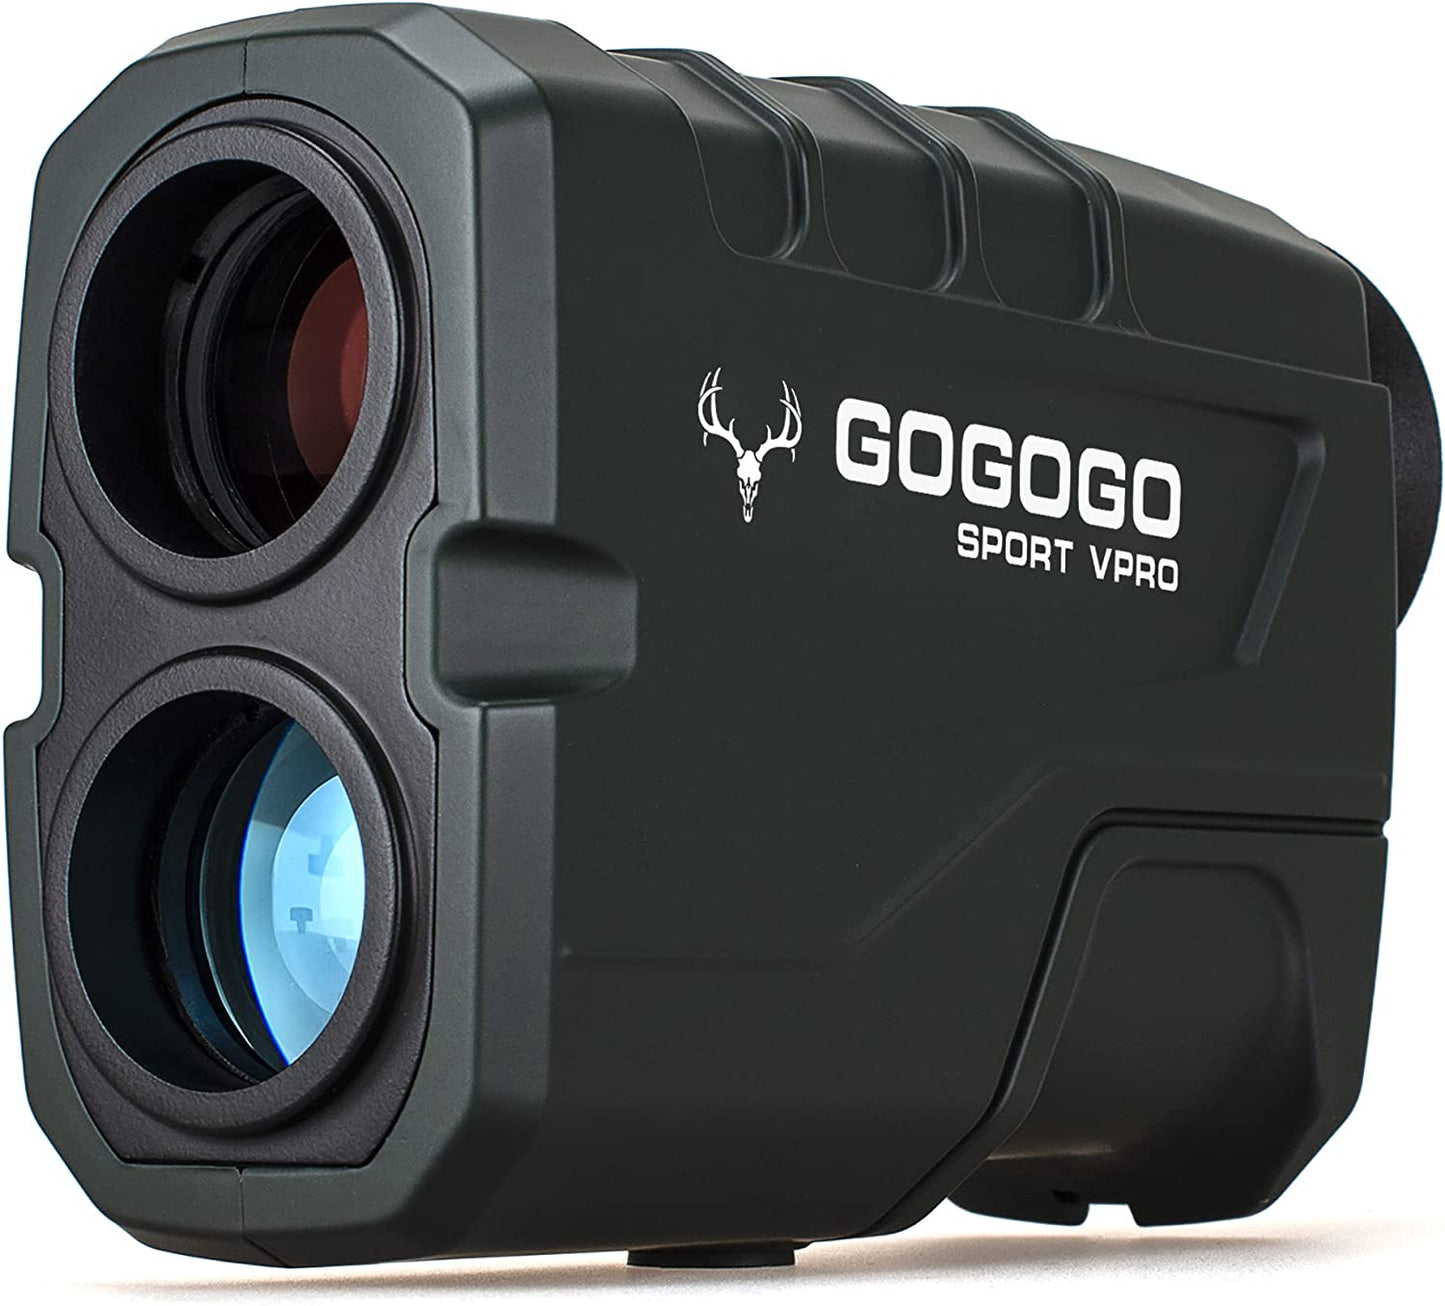 Advanced Green Hunting Rangefinder - Accurate Laser Range Finder for Hunting and Golf with Speed, Slope, Scan, and Normal Measurements up to 1200 Yards